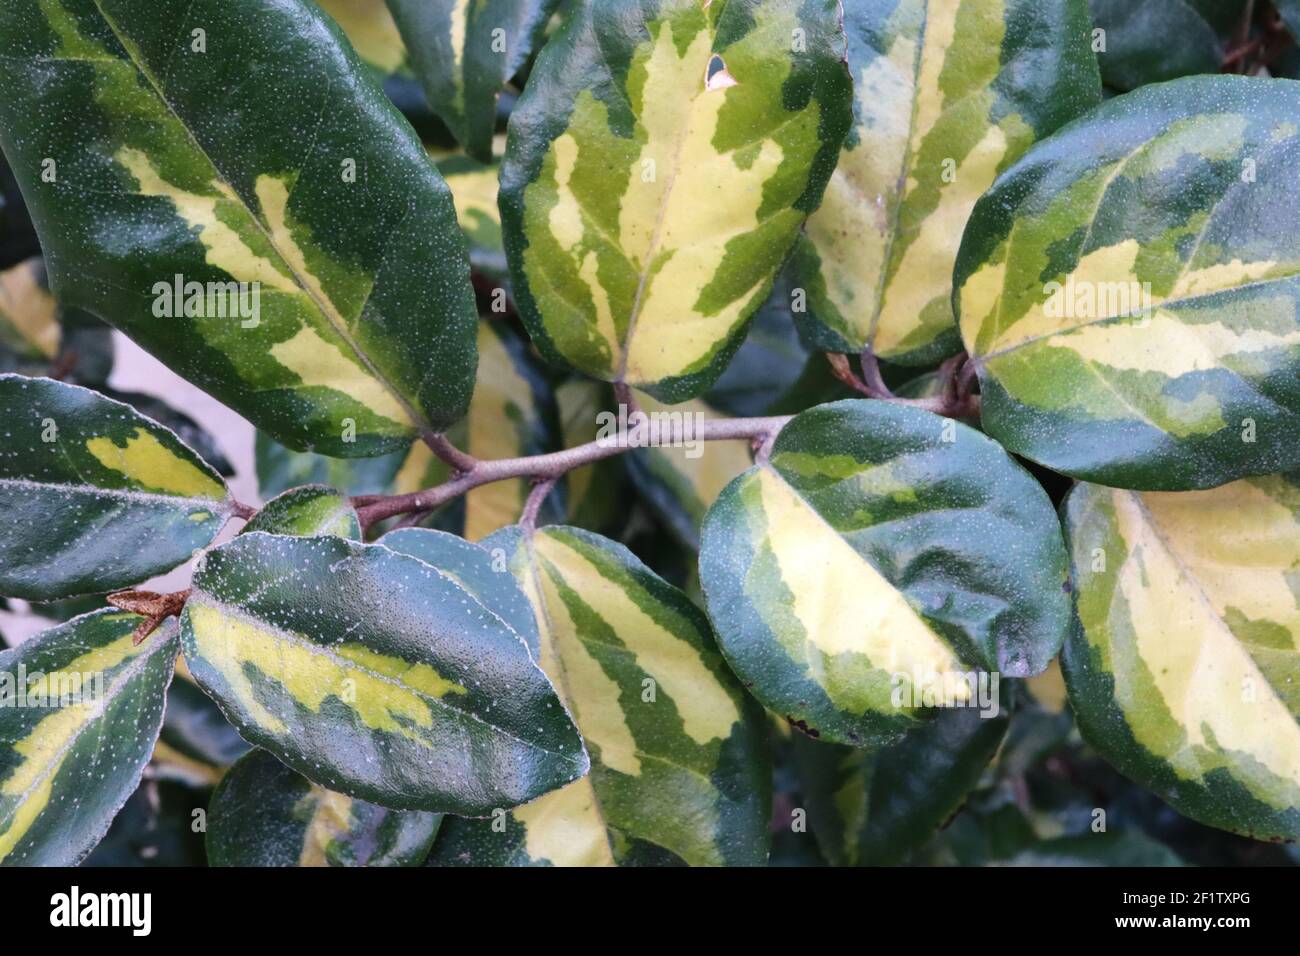 Elaeagnus x ebbingei ‘Limelight’ Oleaster Limelight – variegated foliage with silver spots,  March, England, UK Stock Photo